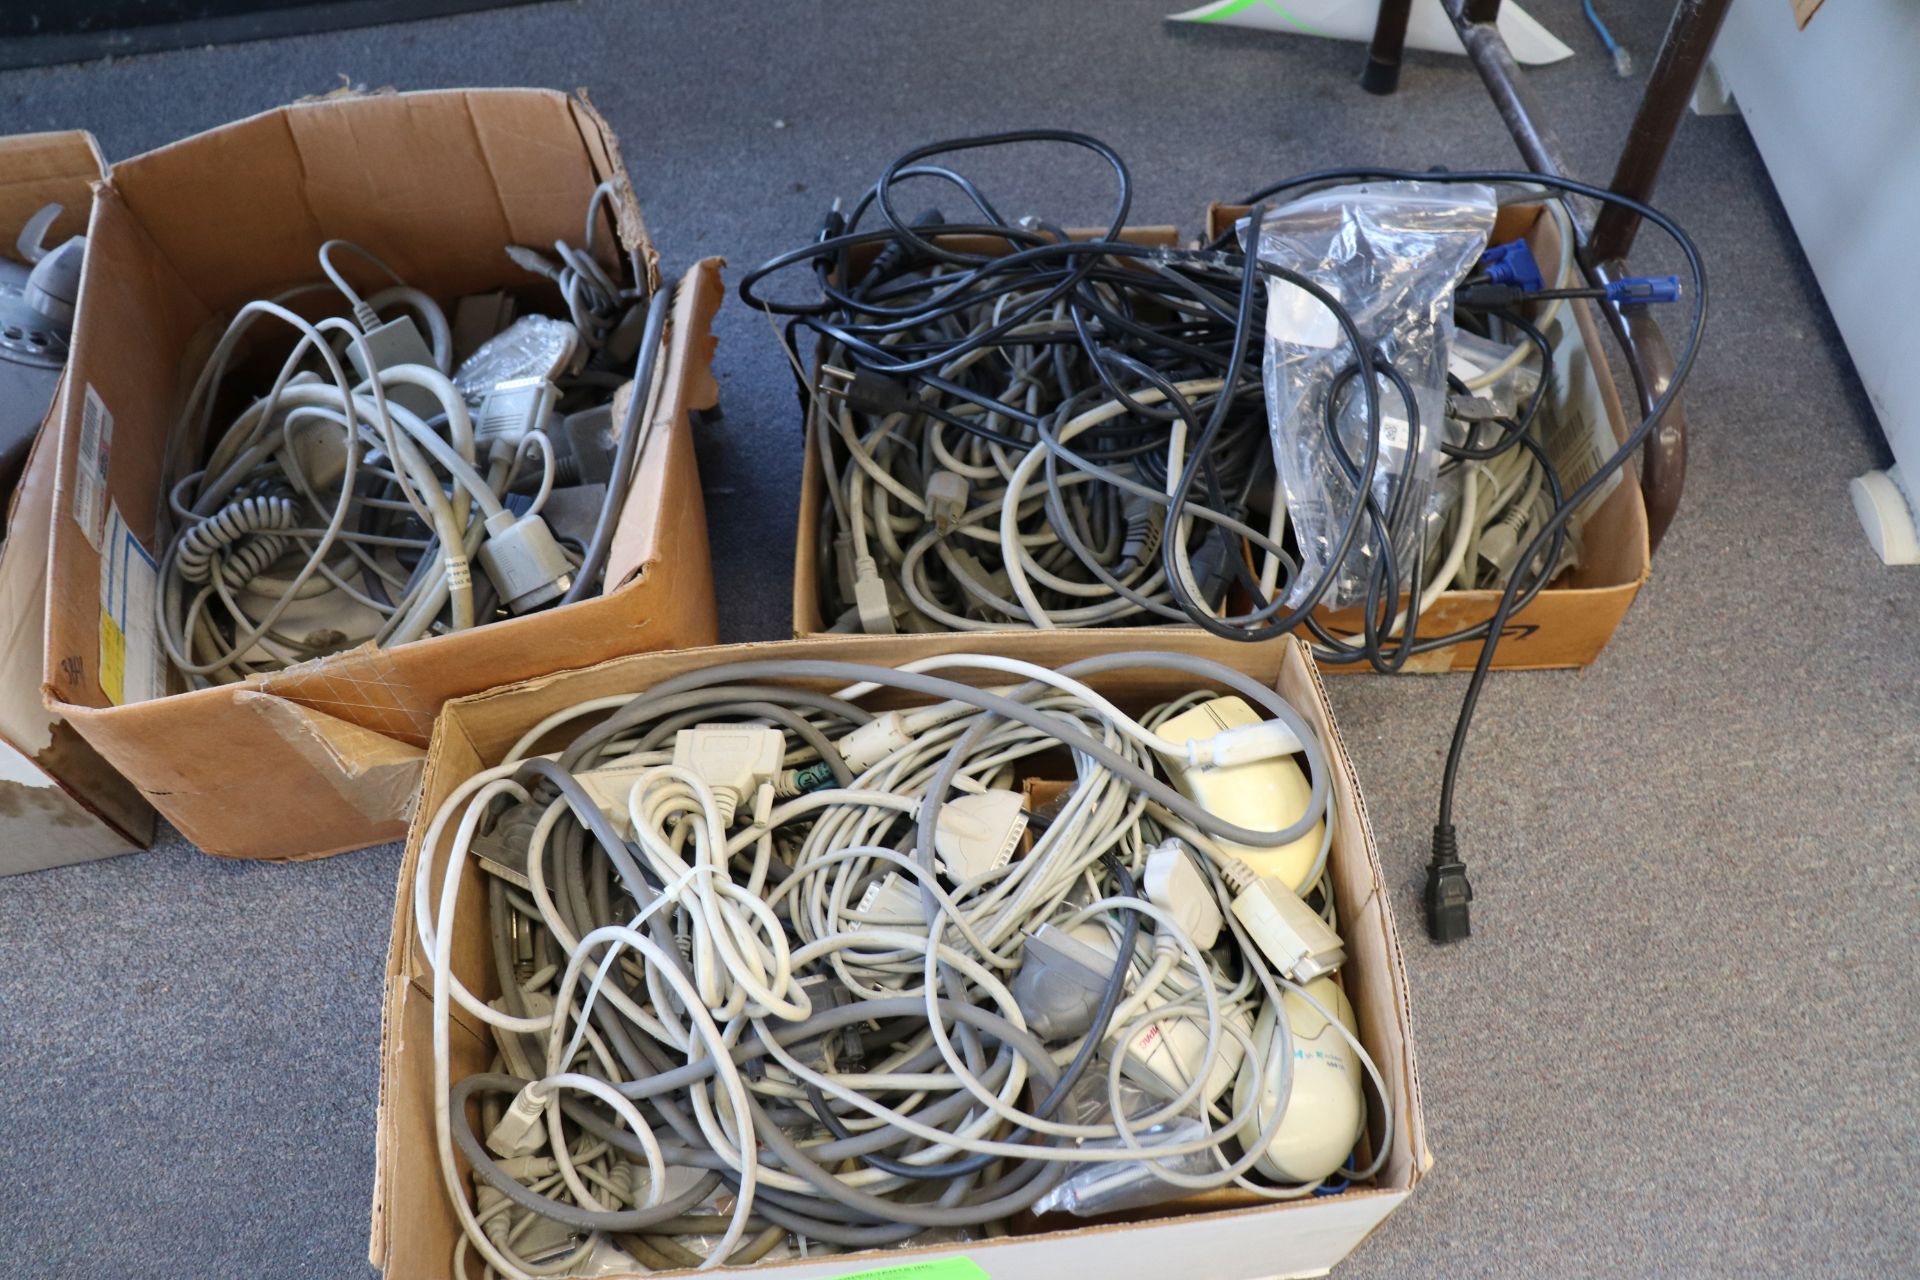 Group of computer wire, mouses and telephones